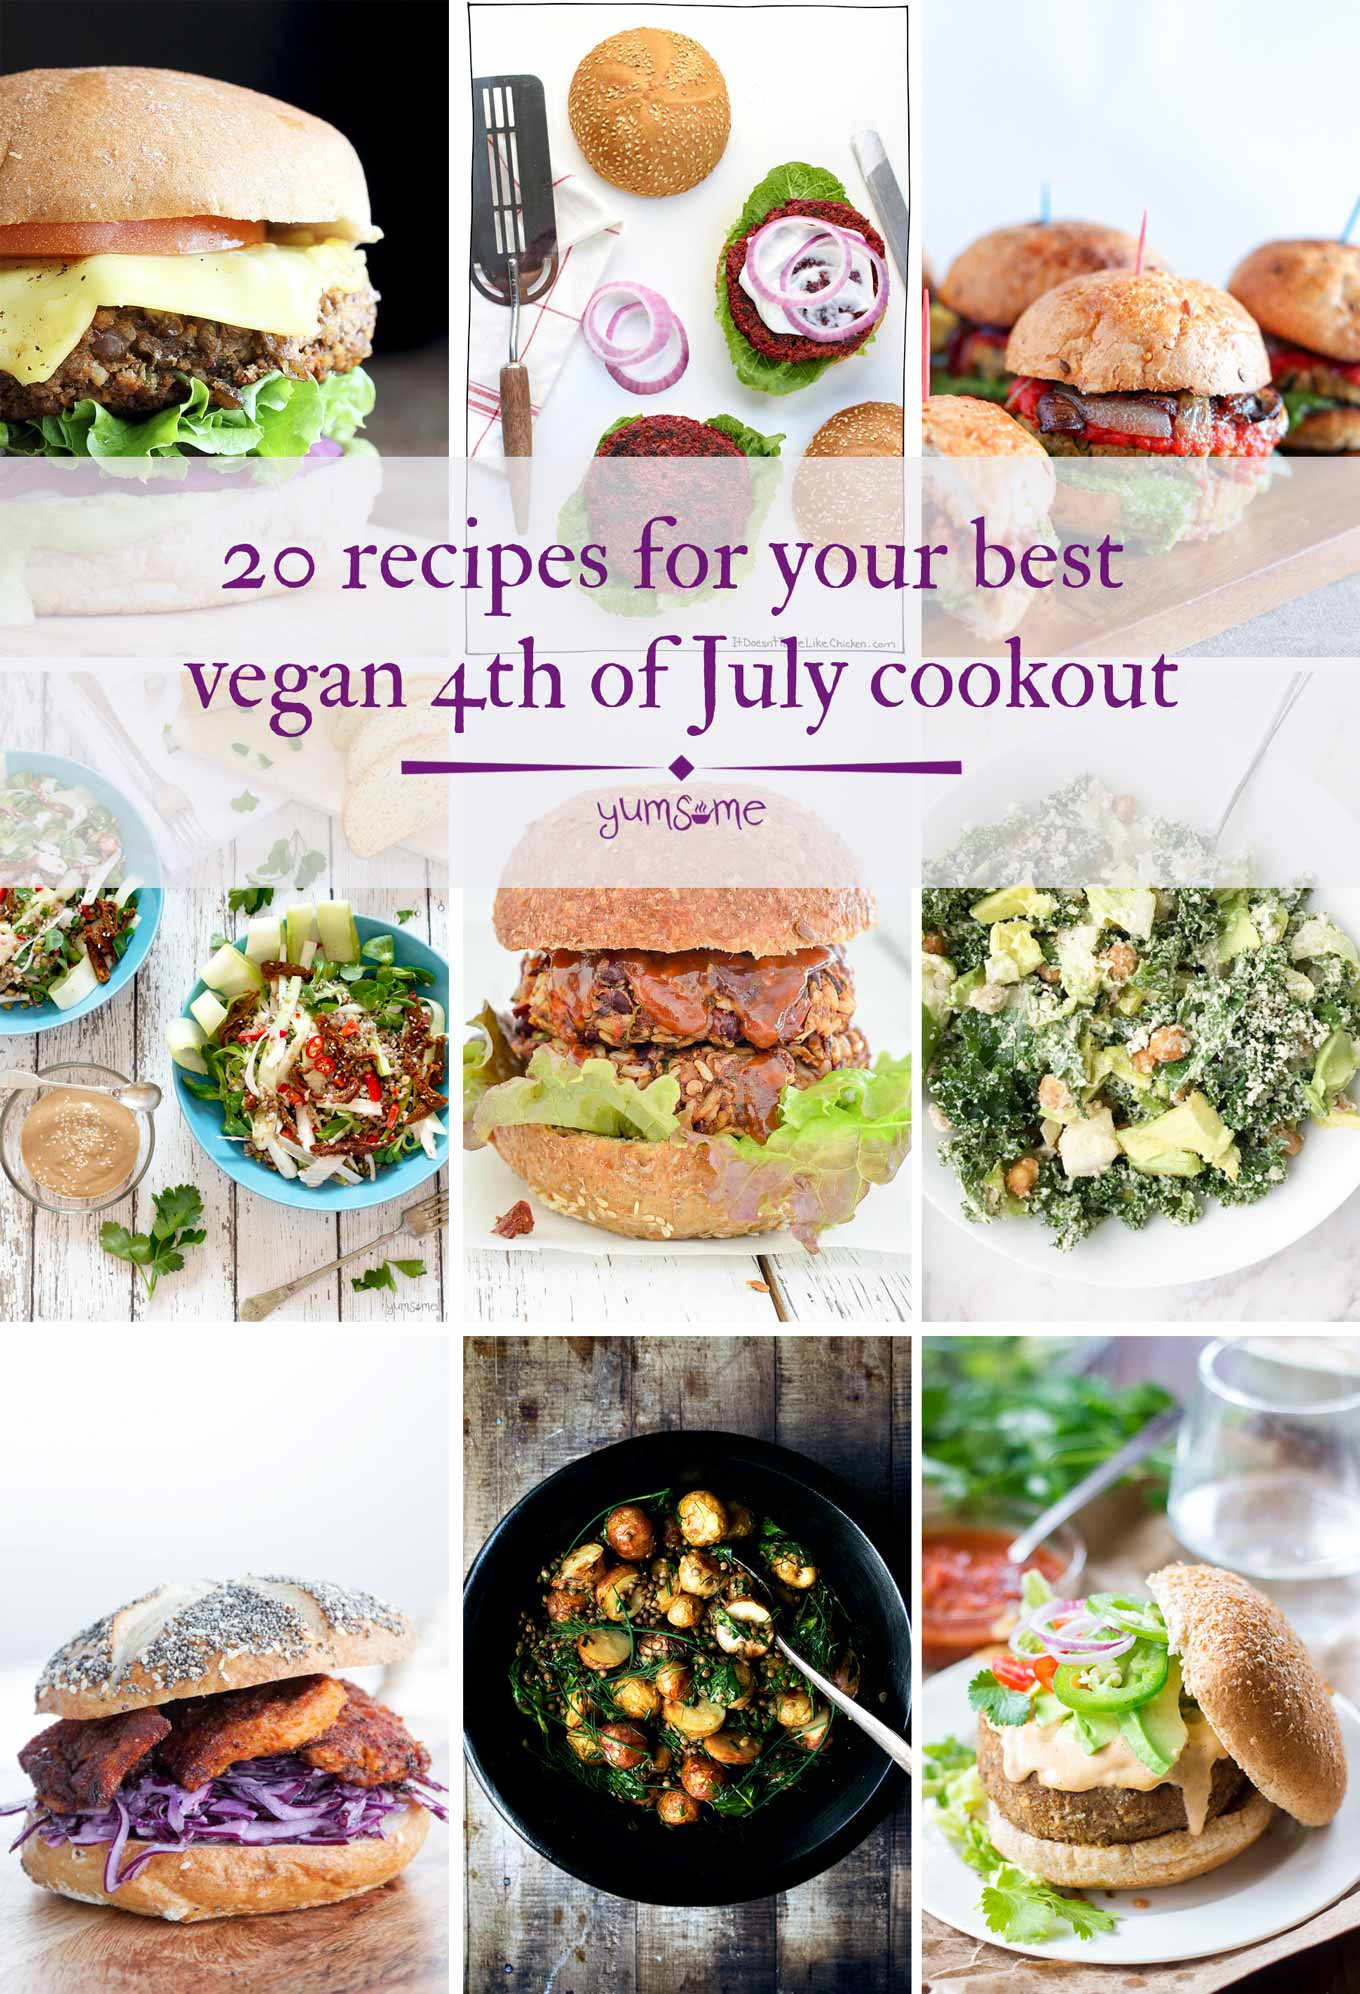 Vegan Fourth Of July Recipes
 20 Recipes For Your Best Vegan 4th of July Cookout